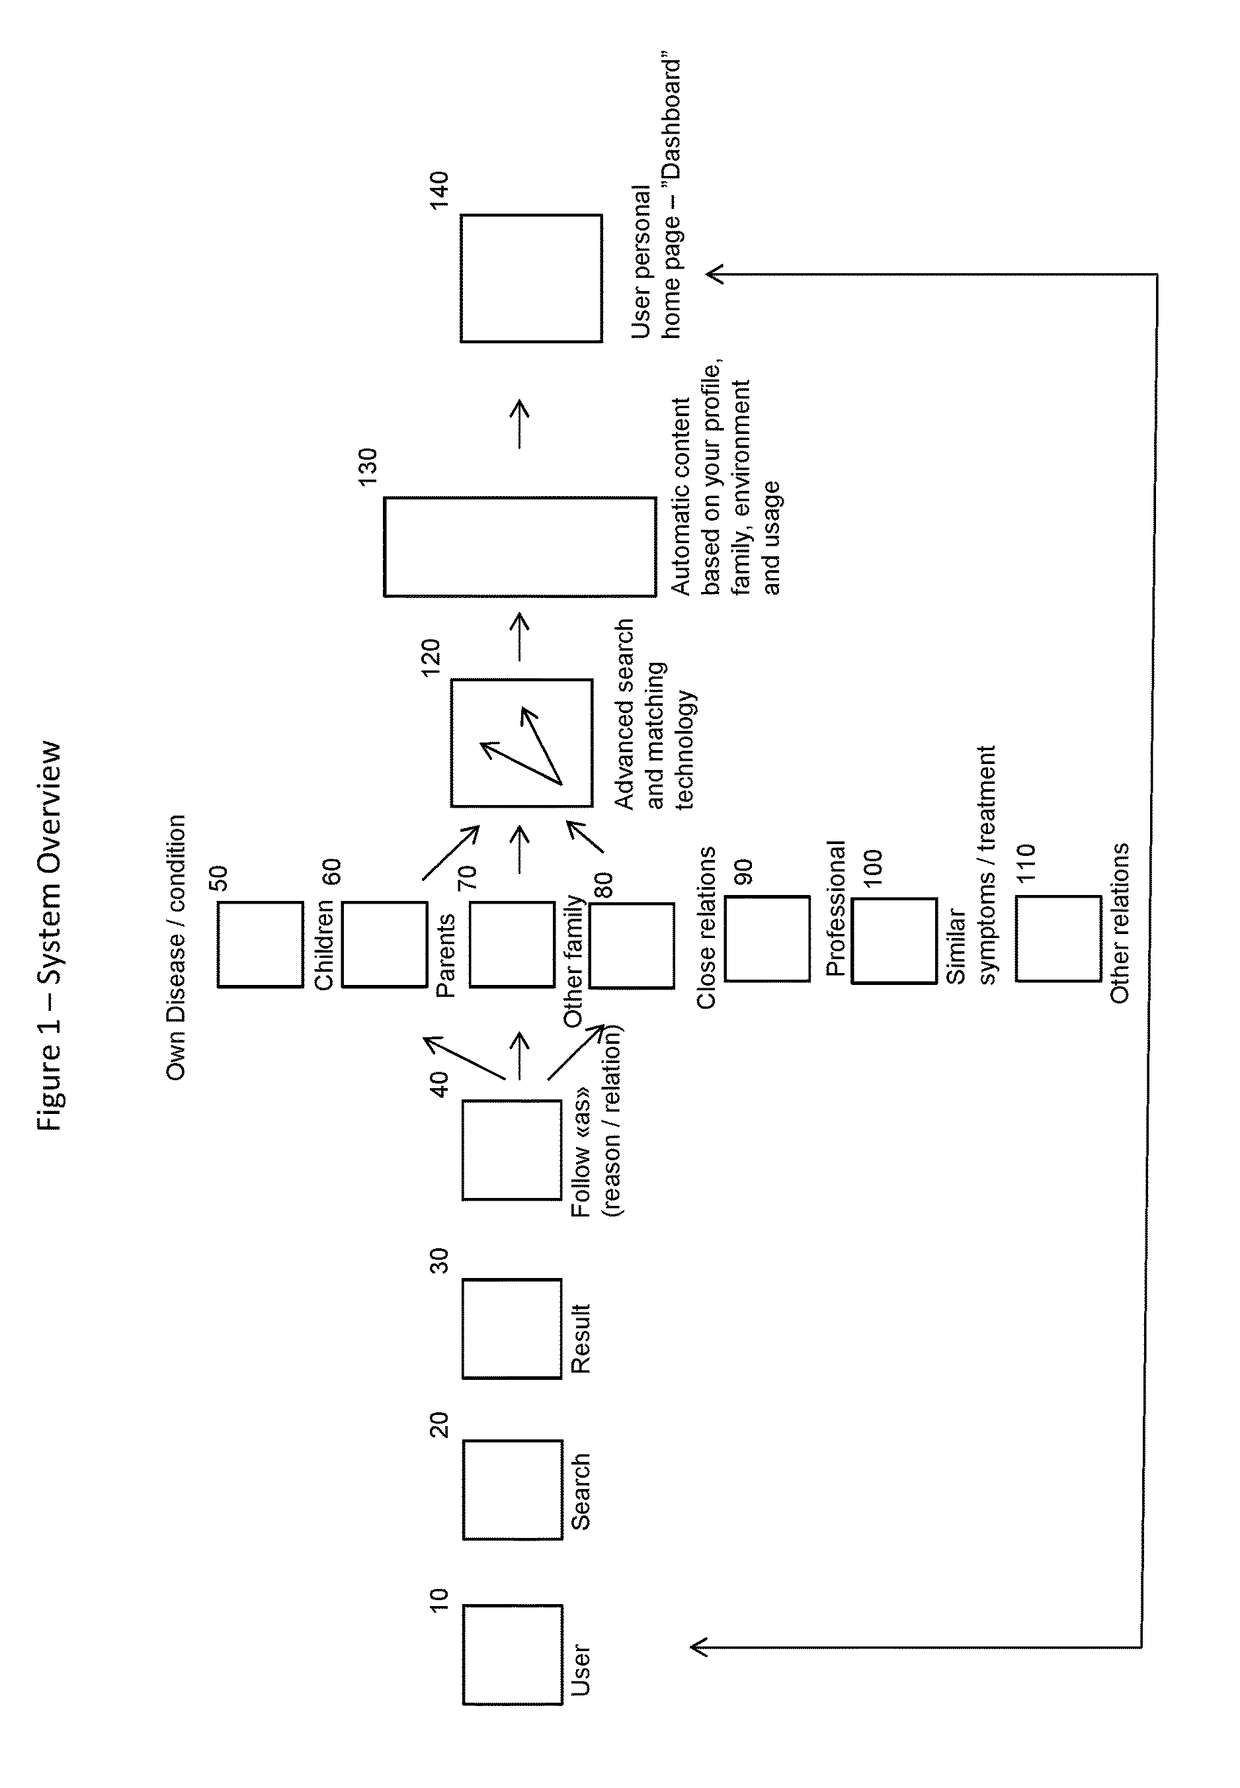 Method and system for providing personalized intelligent health content based on a user profile